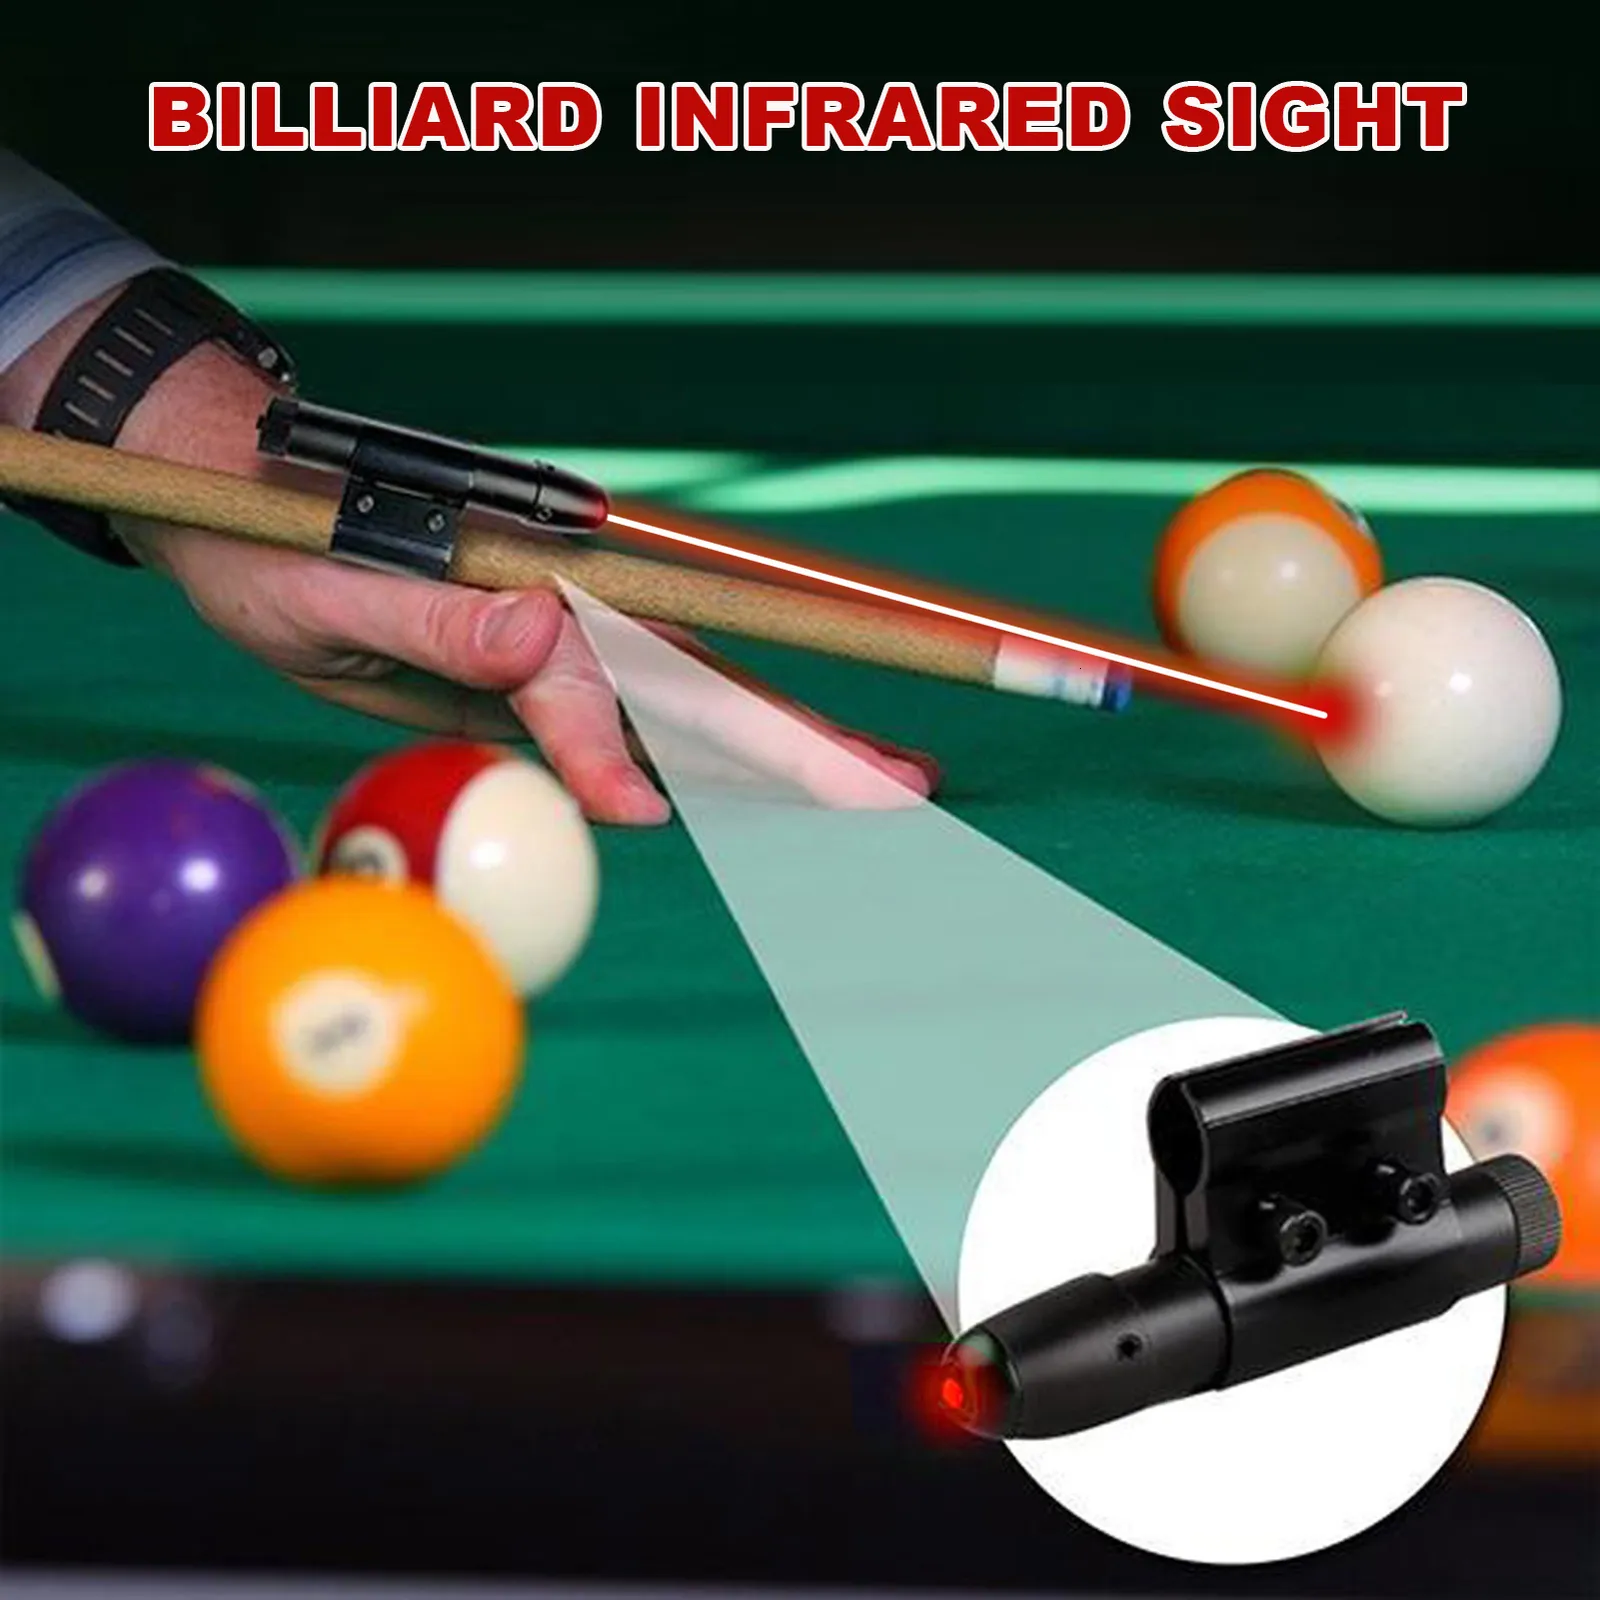 Swooker Cues Laser Sight Billiard Cue Training Aid For Action Correction  And Exercising Billard Accessories From Long07, $19.76